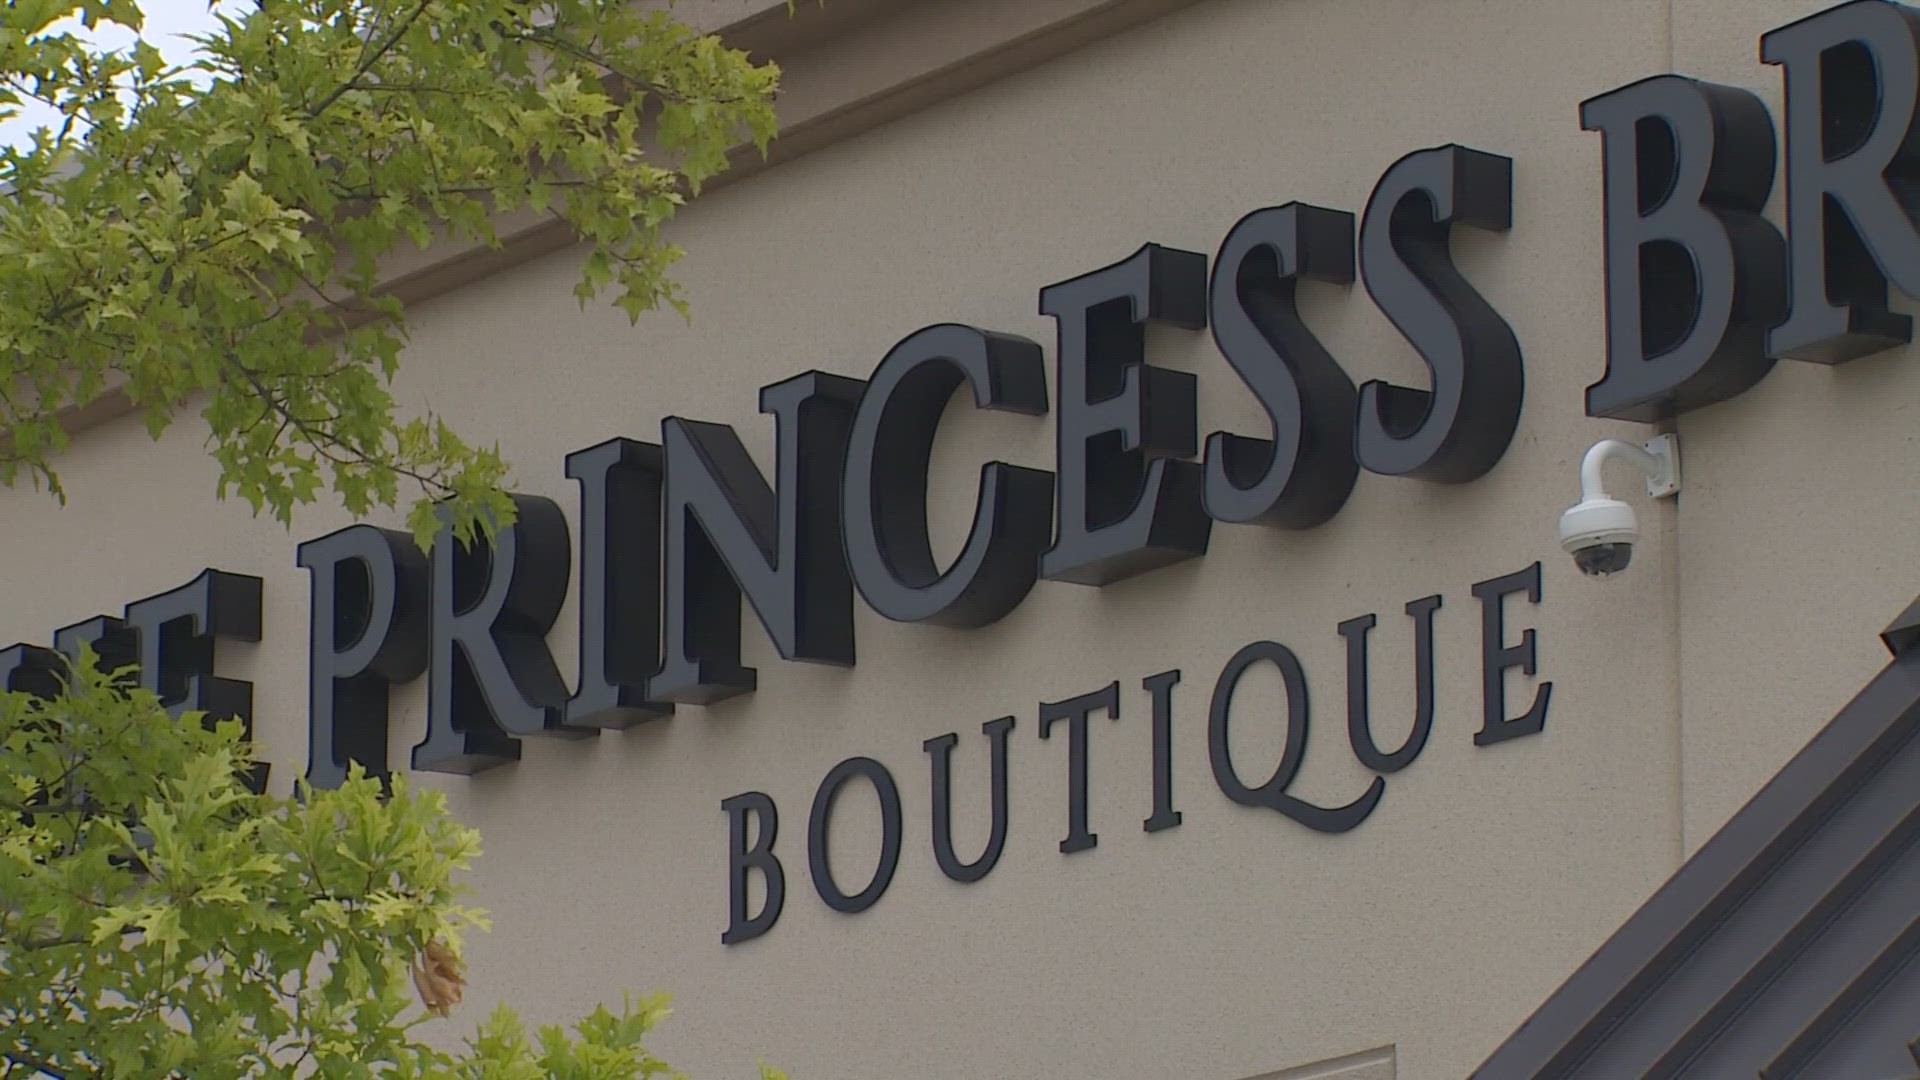 After finding her perfect dress, one bride told KHOU 11 the boutique closed up shop without warning and has stopped taking her calls.